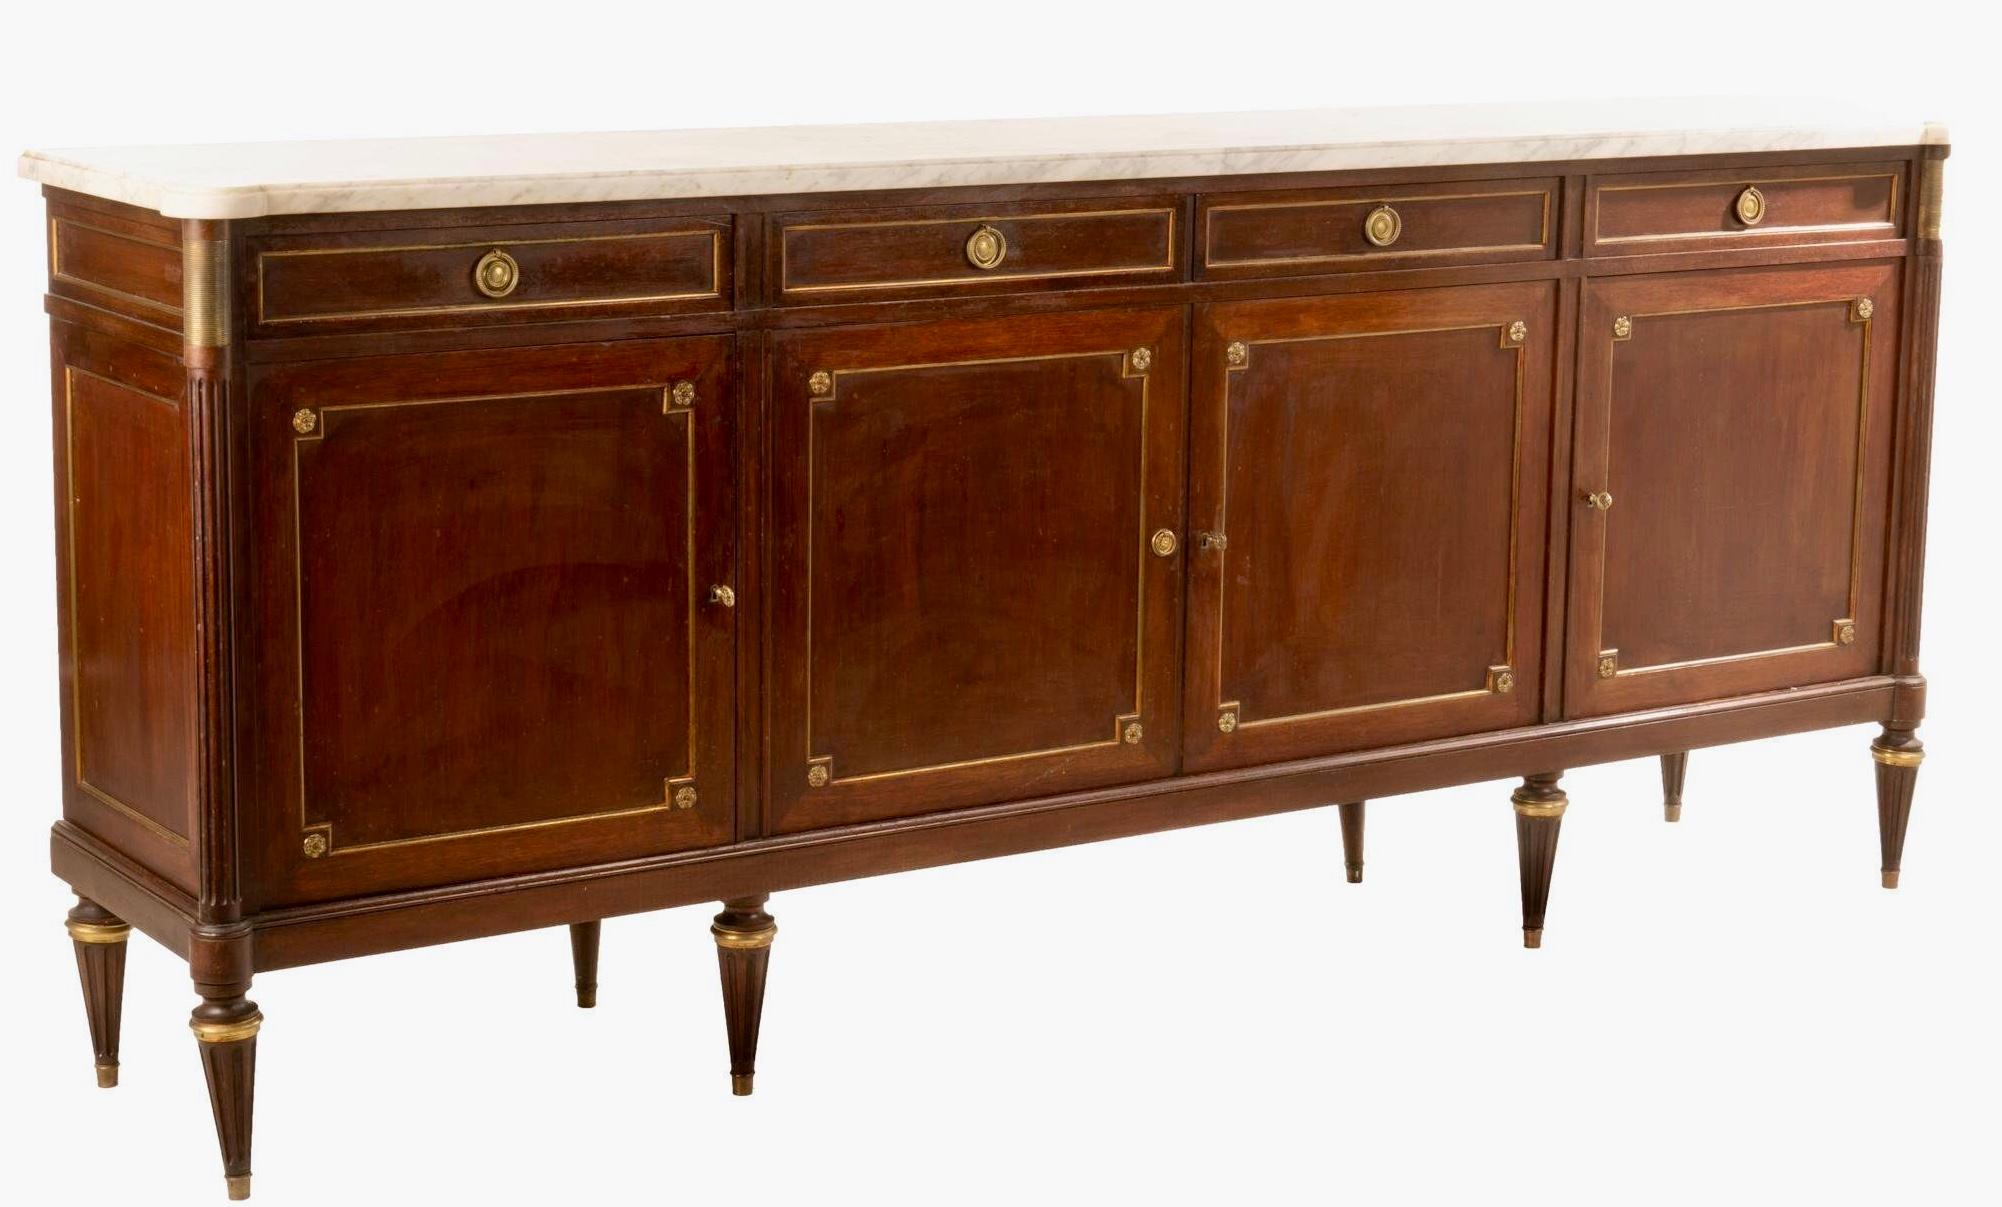 Monumental Louis XVI style walnut enfilade, having marble top over four lined drawers and cabinets leading to interior shelf storage, featuring brass rosette hardware rising on tapered legs ending in brass sabots.